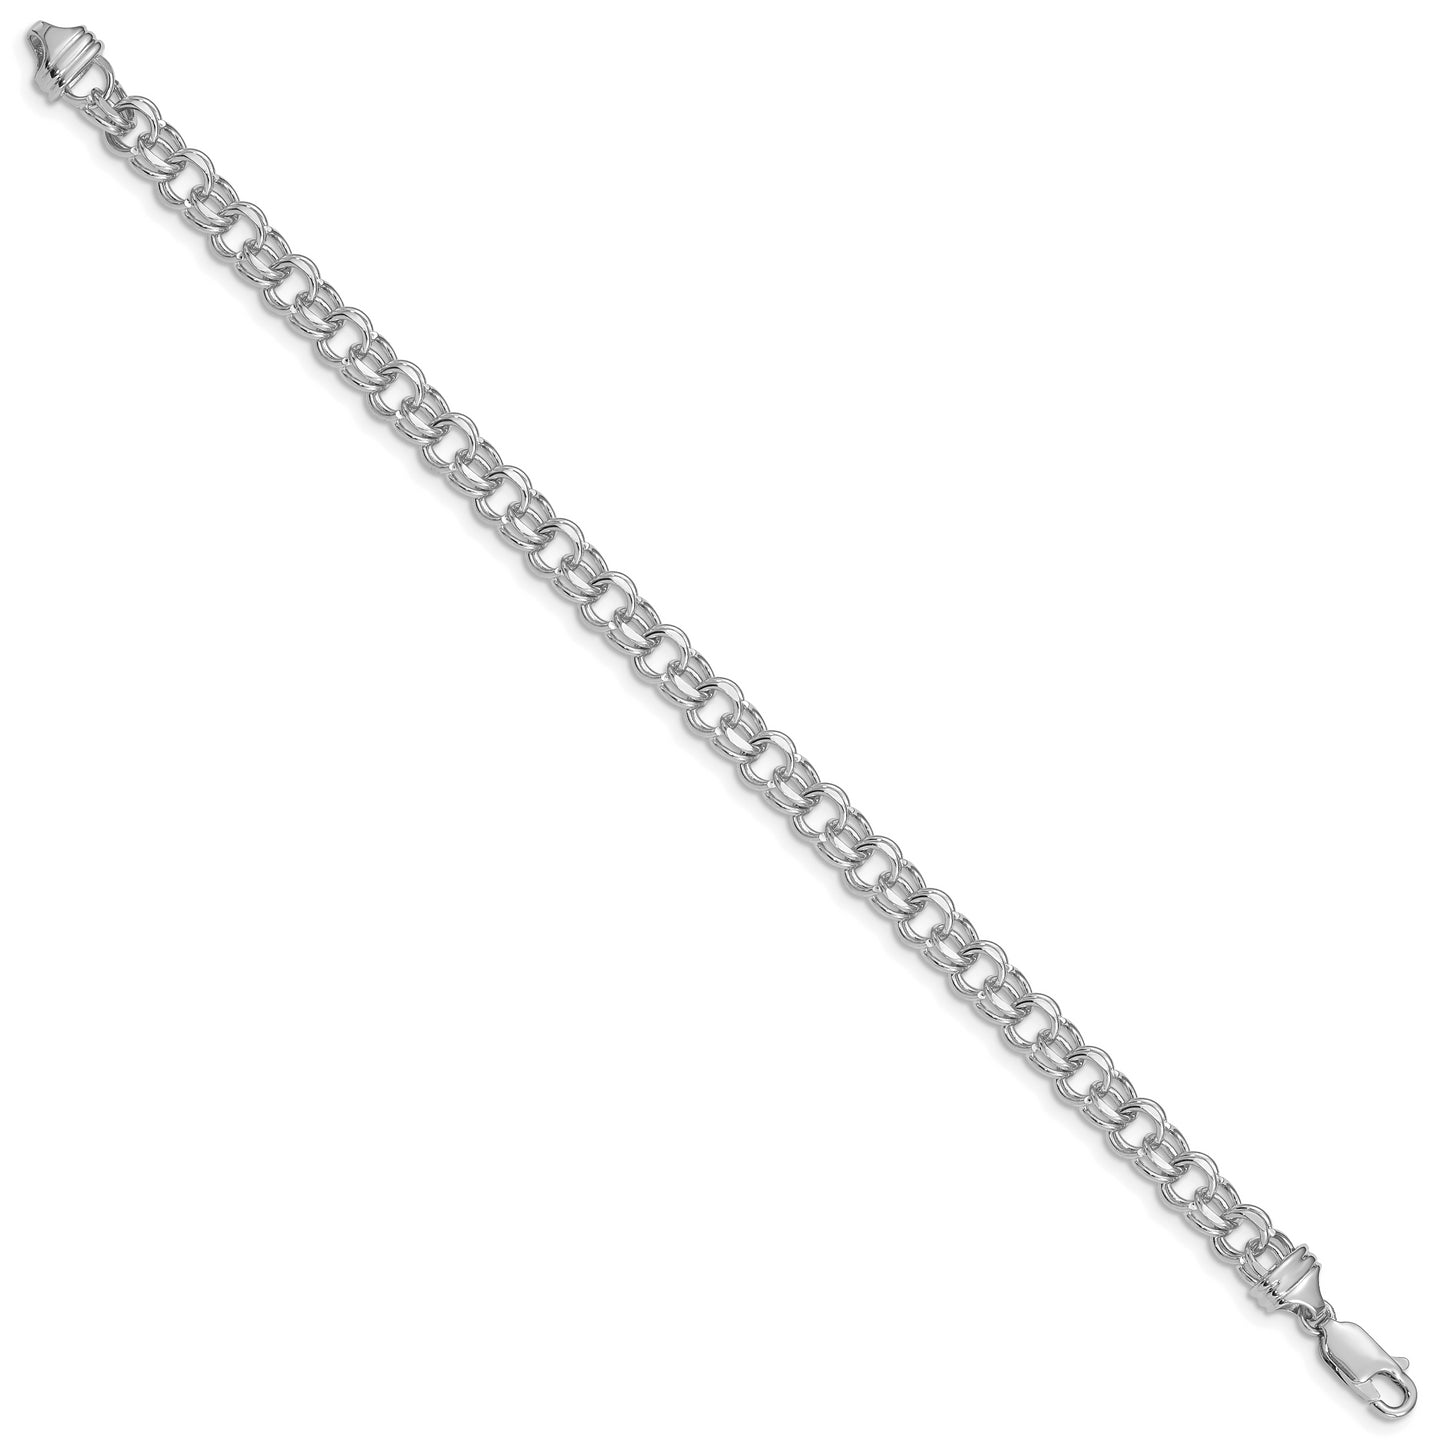 14k White Gold 7in 5.5mm Solid Double Link Charm Bracelet